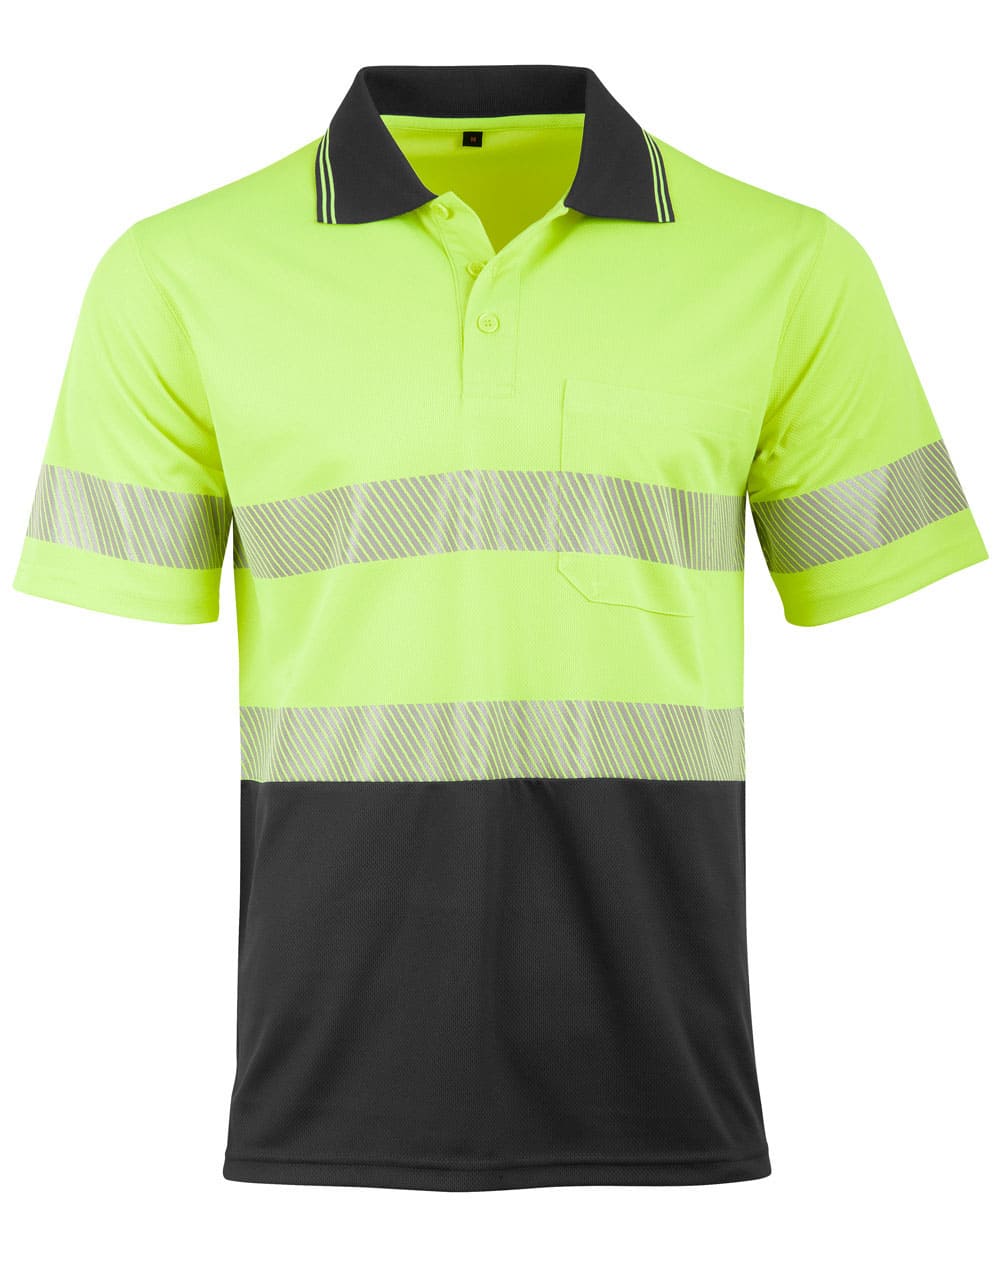 Custom Hi-Vis Polos (Yellow Charcoal) Unisex CoolDry Polyester Online in Perth Australia